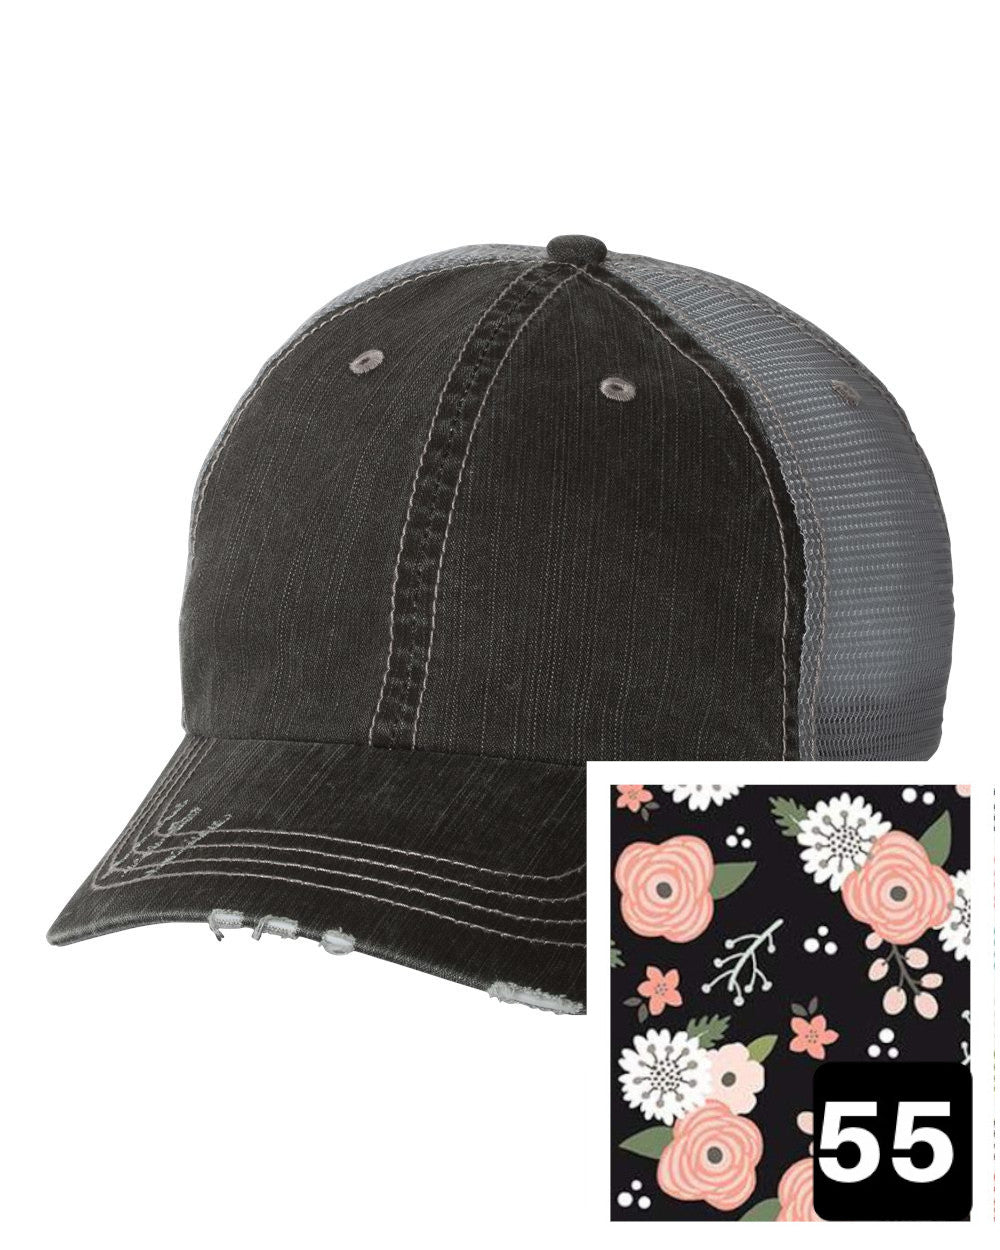 gray distressed trucker hat with petite floral on navy fabric state of California